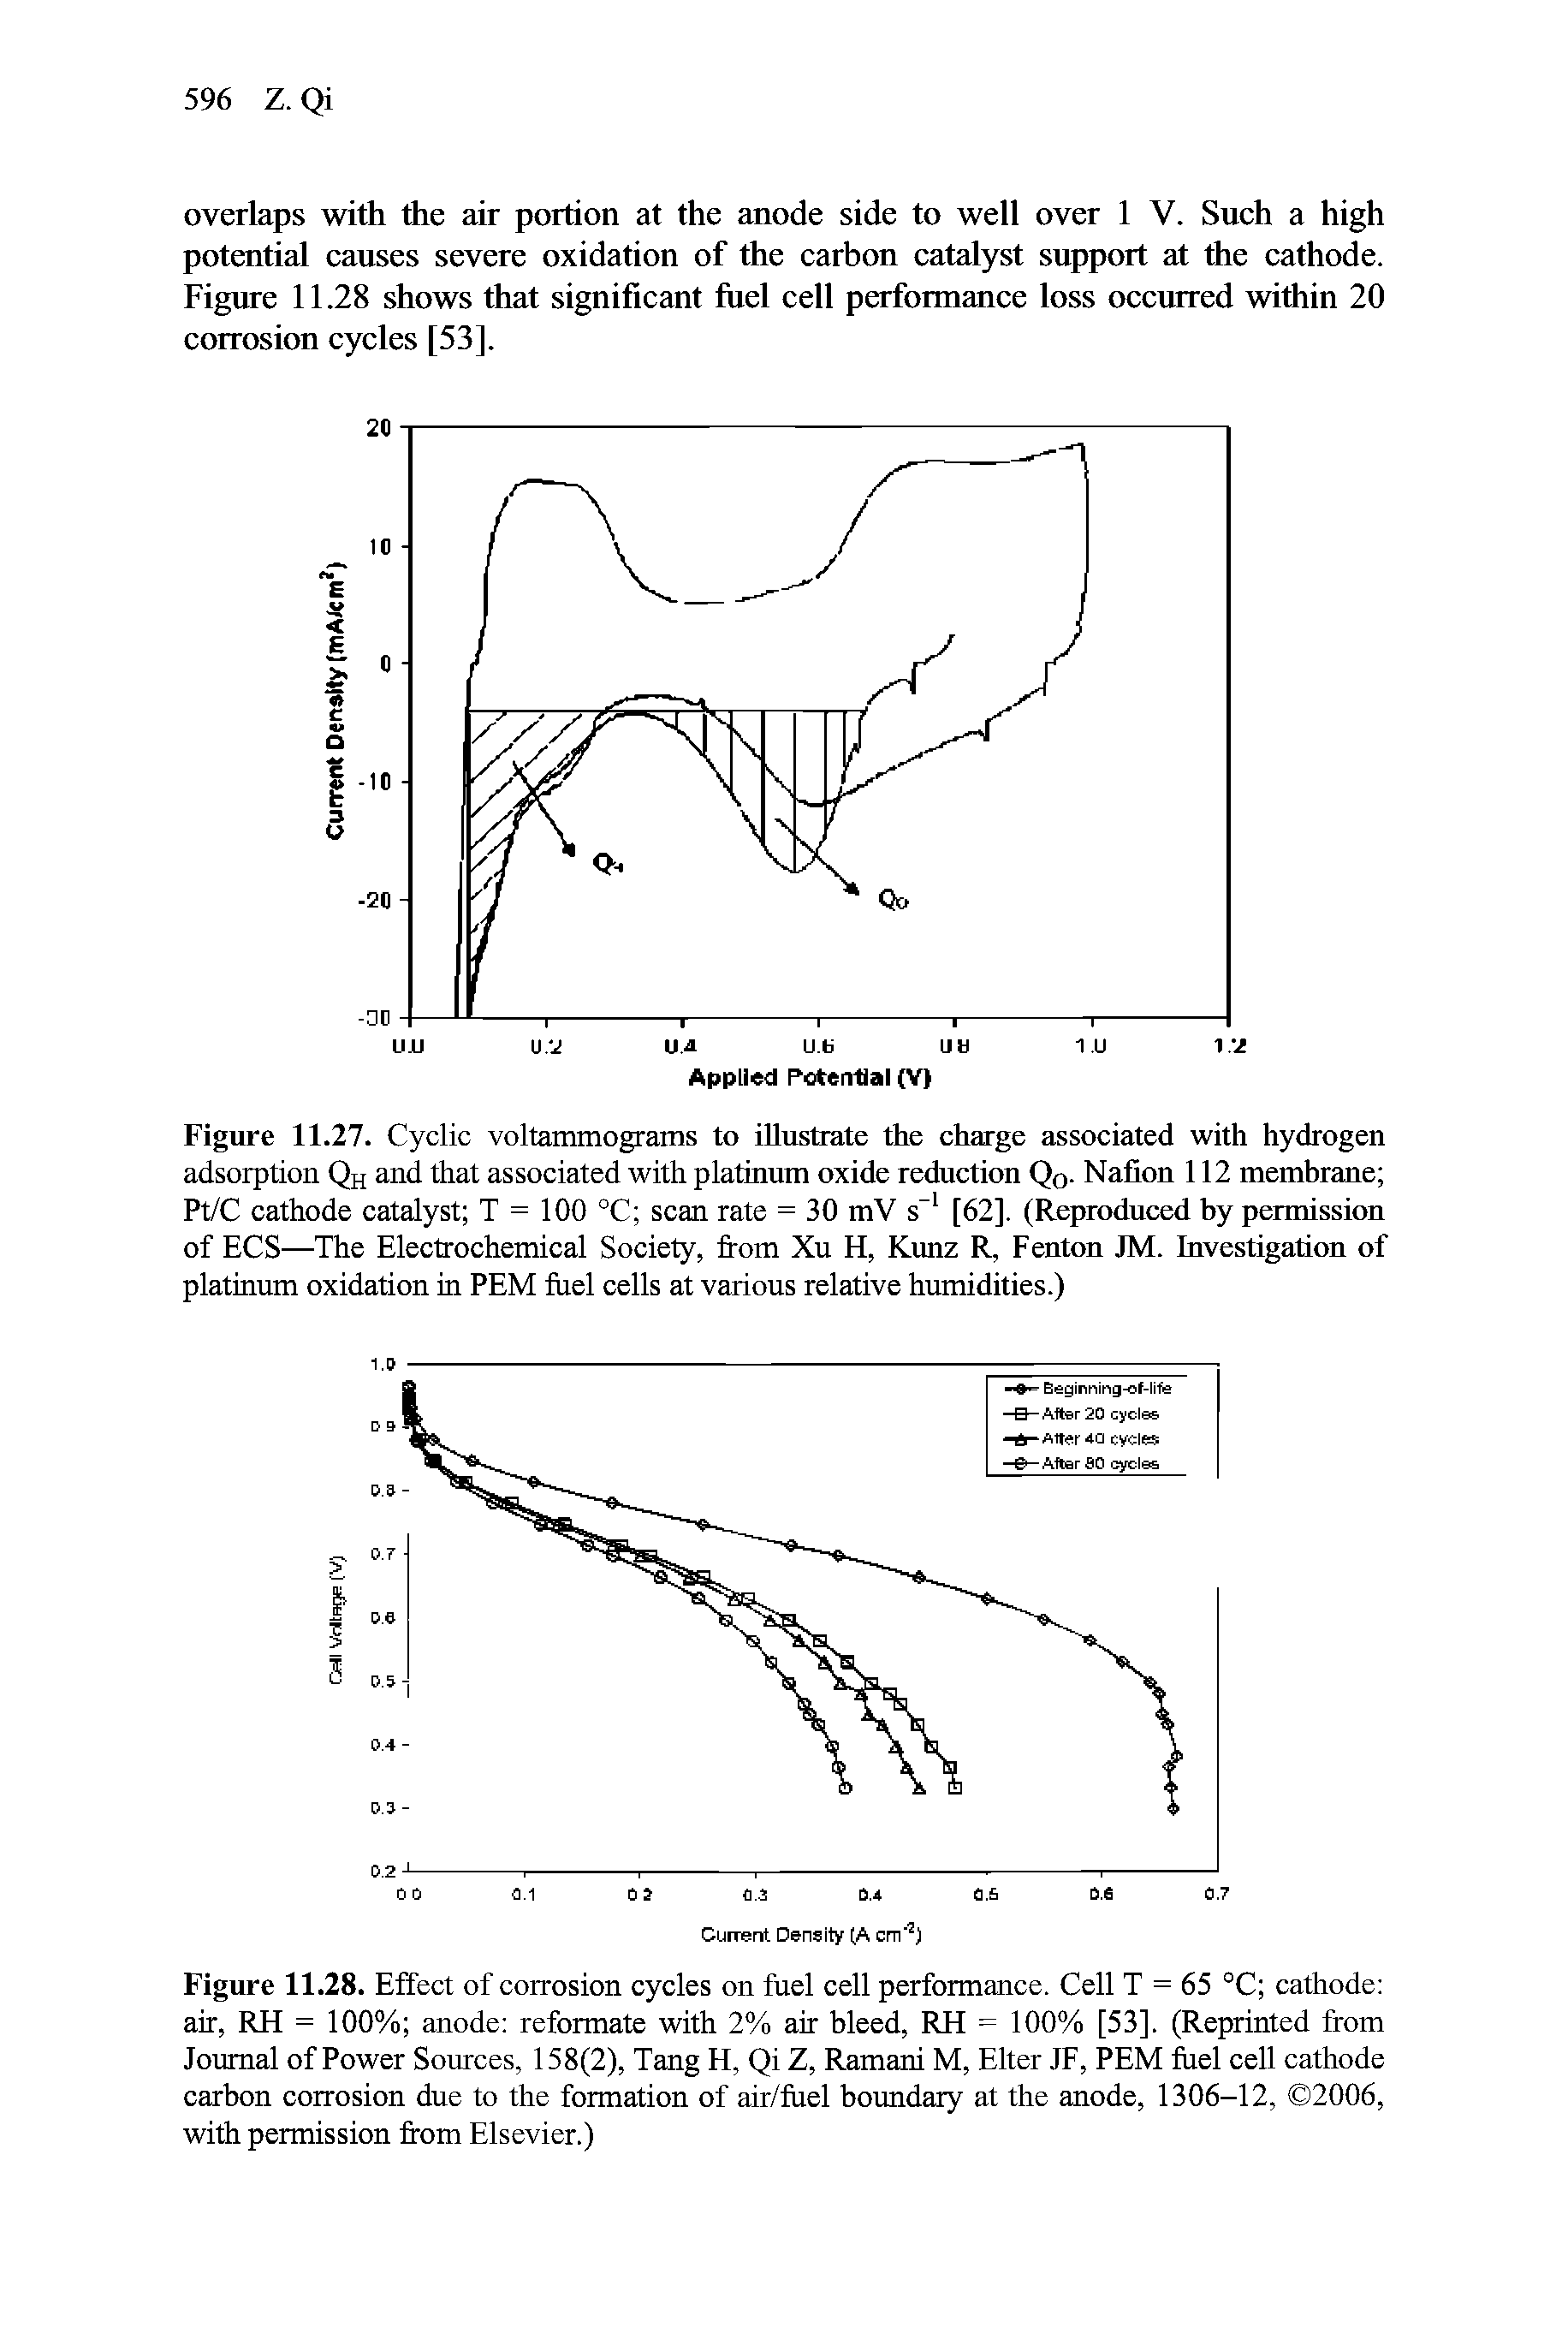 Figure 11.27. Cyclic voltammograms to illustrate the eharge associated with hydrogen adsorption Qh and that associated with platinum oxide reduction Qo- Nafion 112 membrane Pt/C cathode catalyst T = 100 °C scan rate = 30 mV s [62]. (Reproduced by permission of ECS—The Electrochemical Society, from Xu H, Kunz R, Fenton JM. Investigation of platinum oxidation in PEM fuel cells at various relative humidities.)...